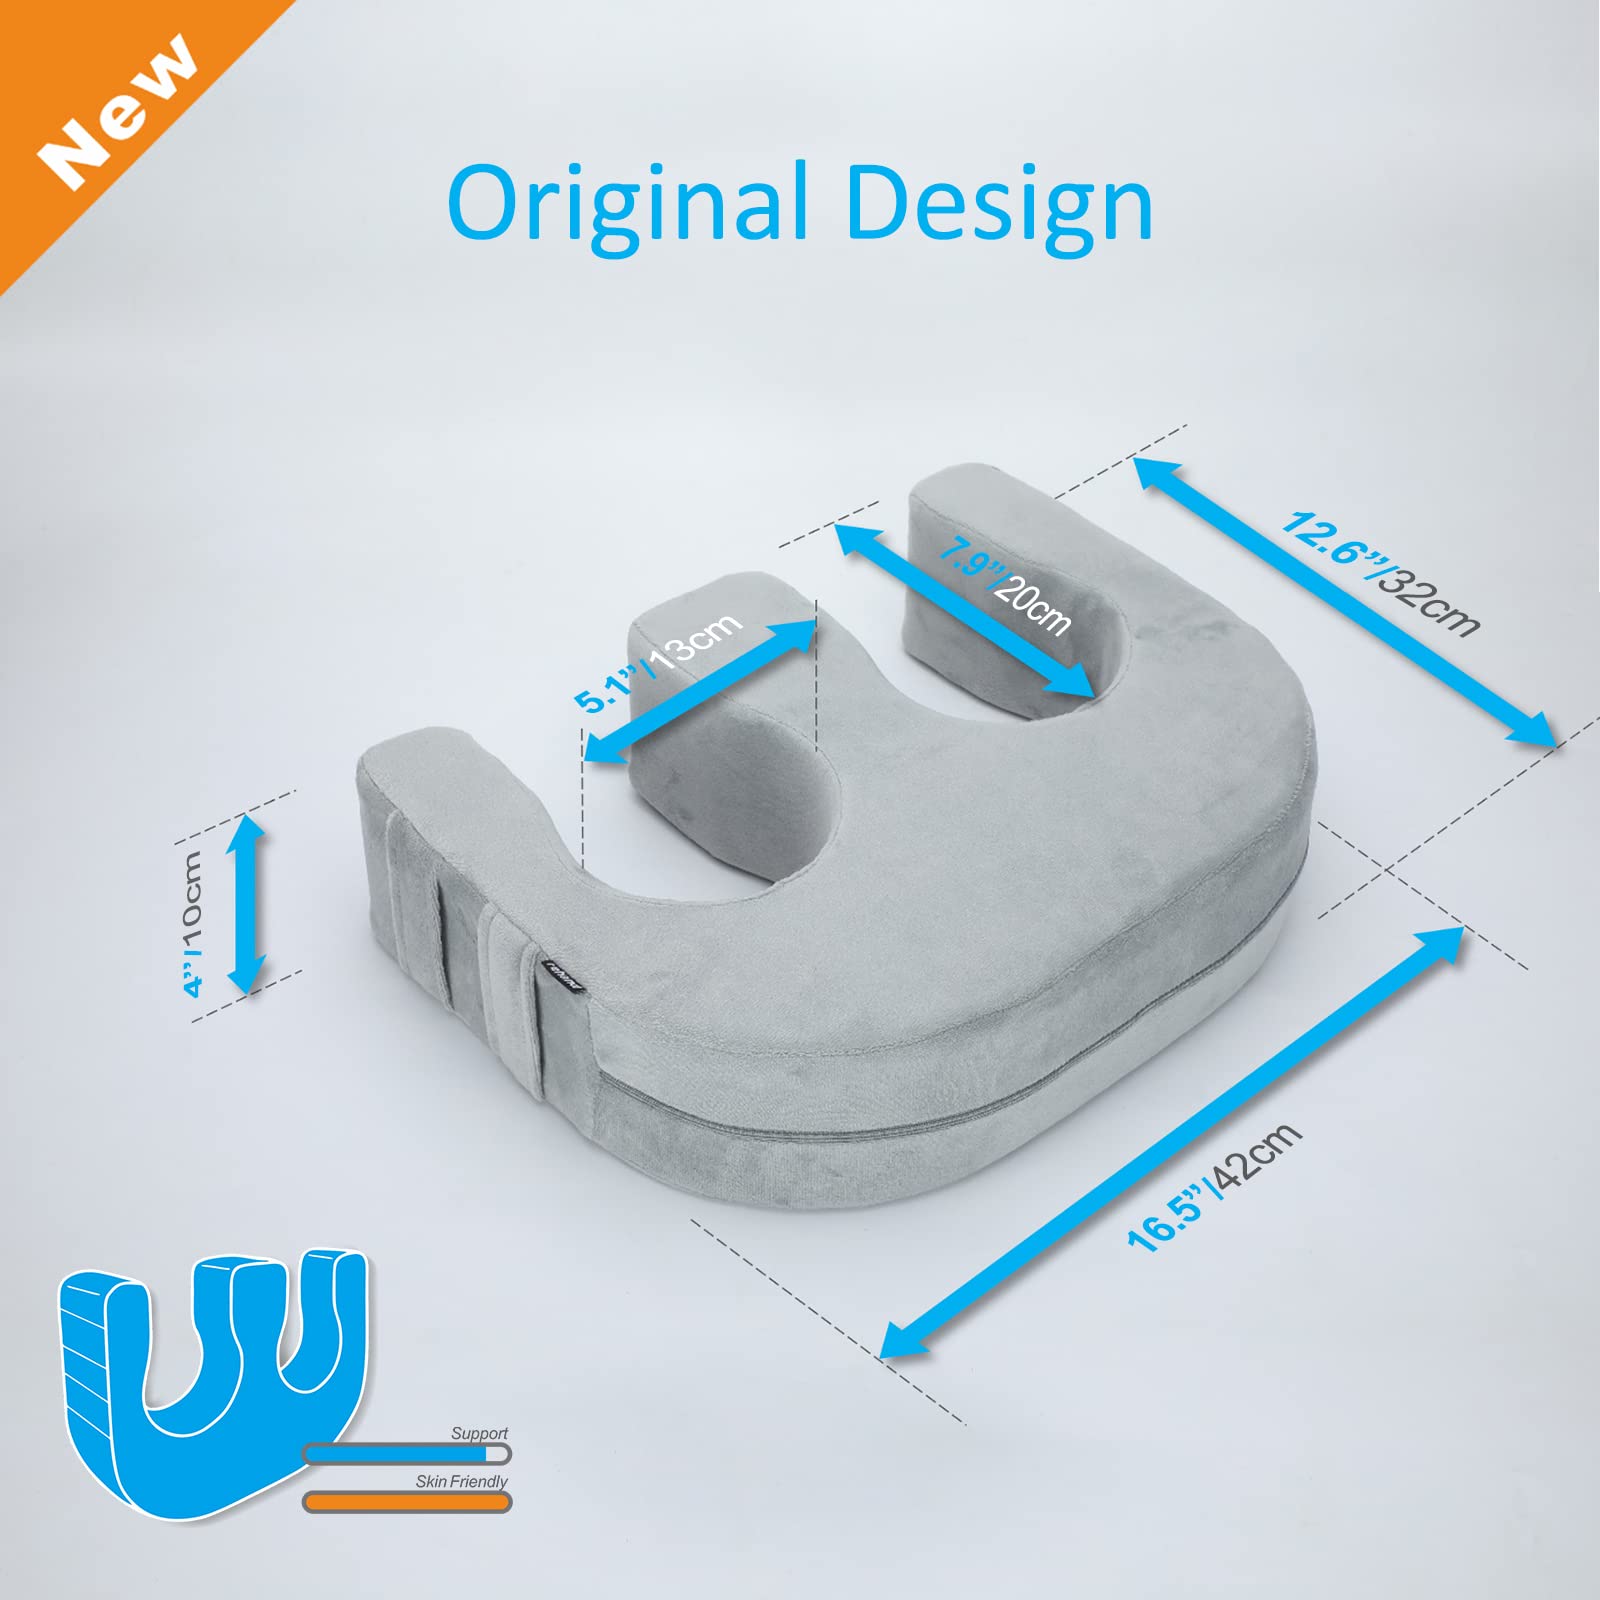 rehand Patient Turning Device, Multifunctional U-Shaped Turning Device, Anti-Decubitus Paralyzed Patient Turning Pillow, Bed Rest Nursing Tool, Help Patients Or Bedridden Elderly People Turn Over